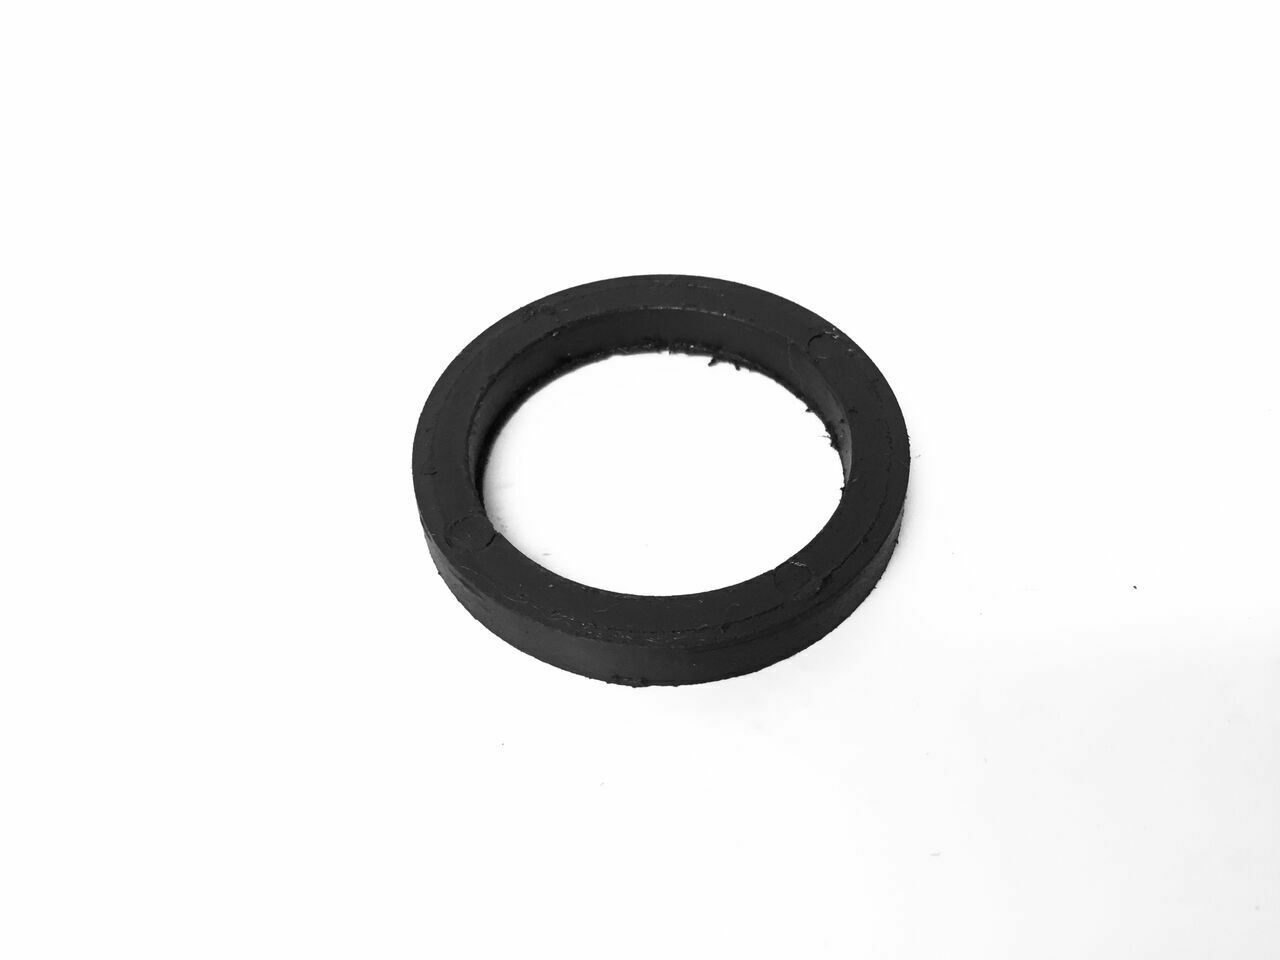 Small Crank Spacer Flat Washer